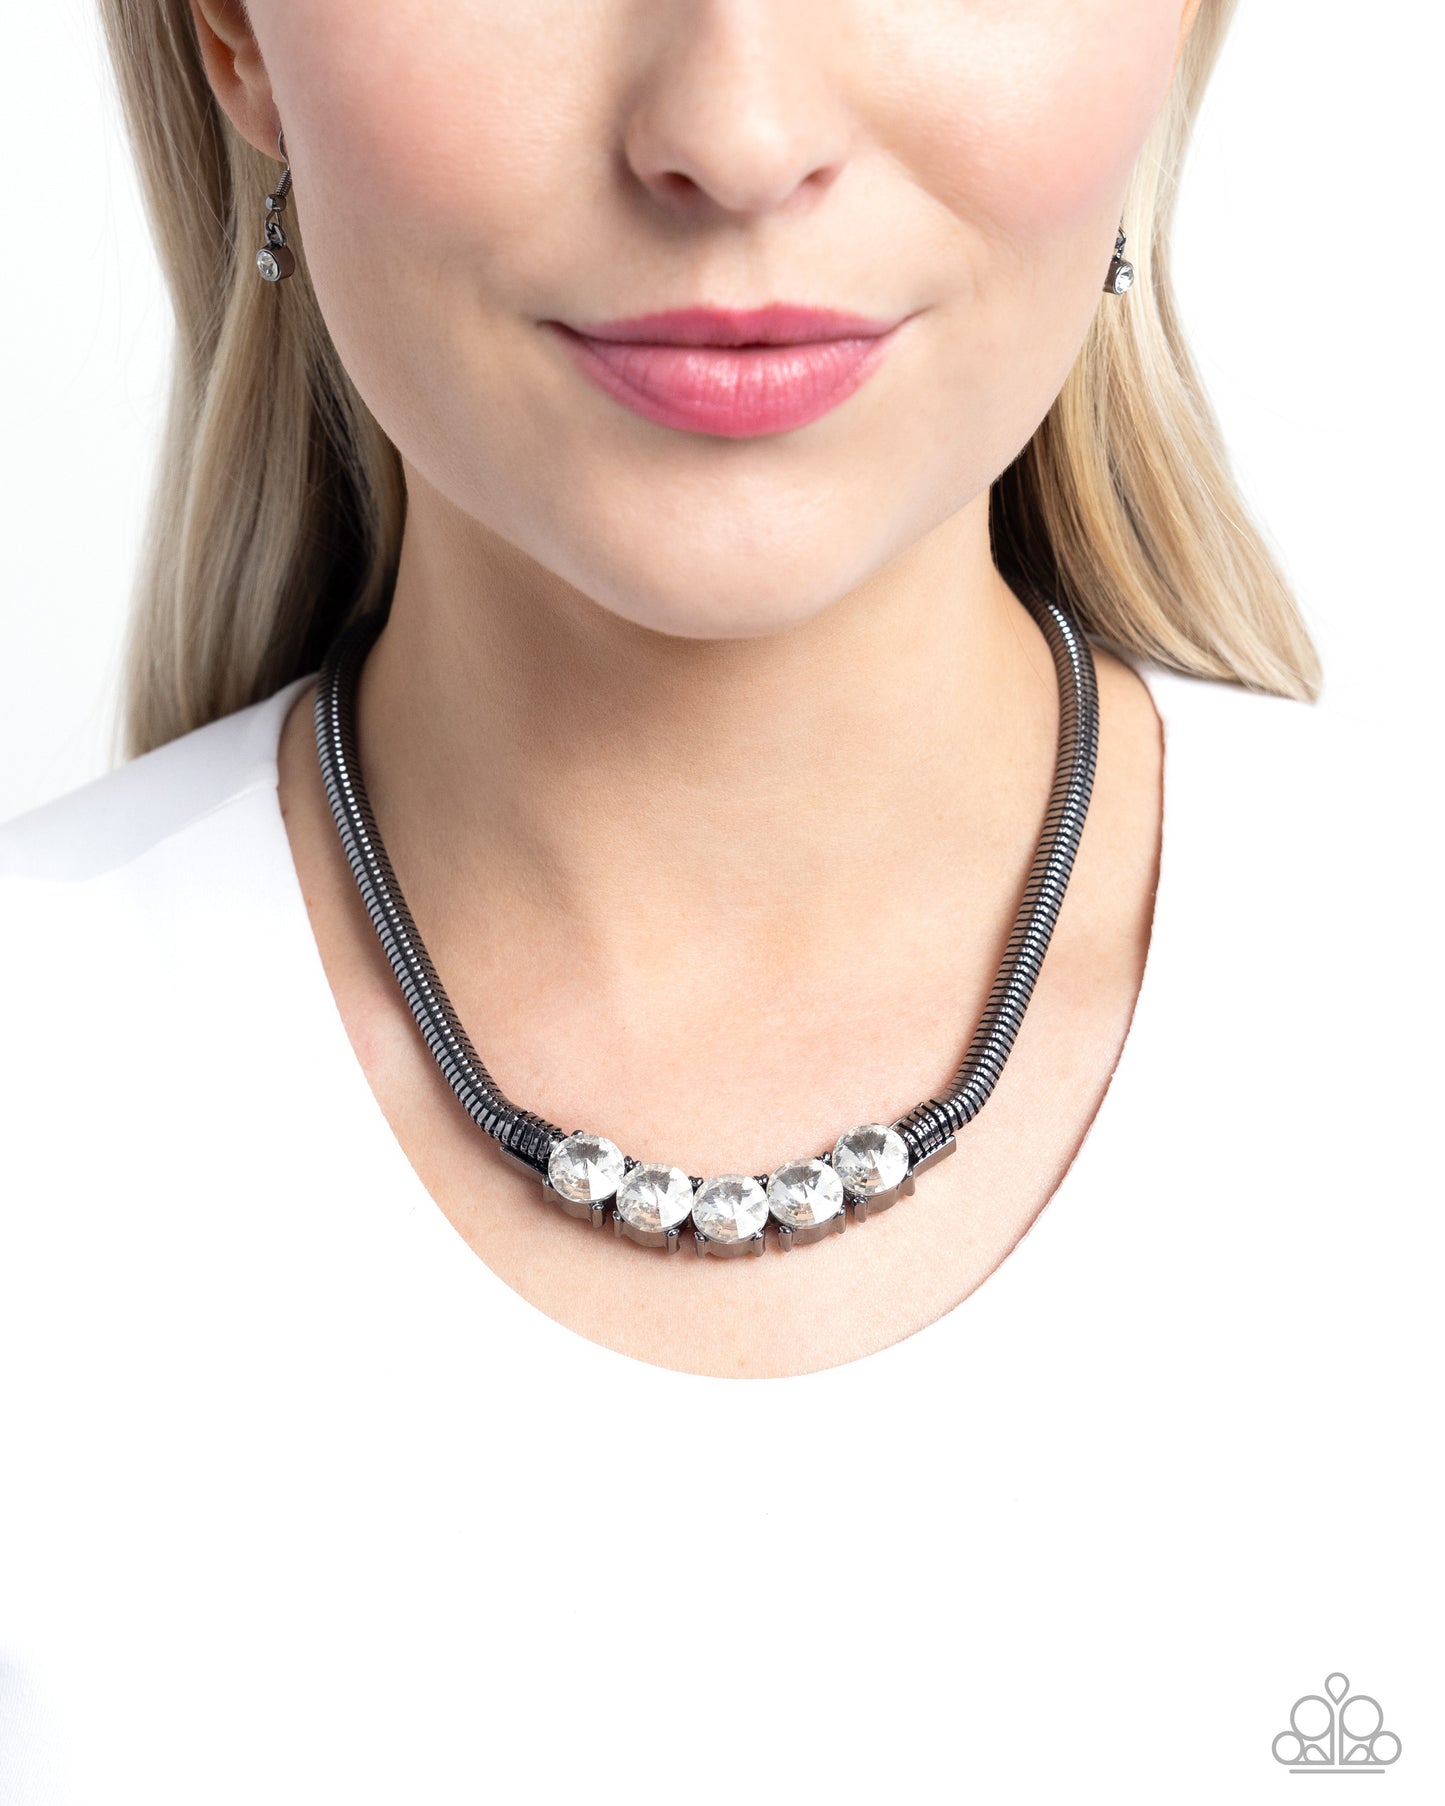 <p>Pronged in place along the center of a thick gunmetal chain, faceted white gems twinkle below the neckline for a glittery, grungy look. Features an adjustable clasp closure.</p> <p><i> Sold as one individual necklace. Includes one pair of matching earrings.</i></p>